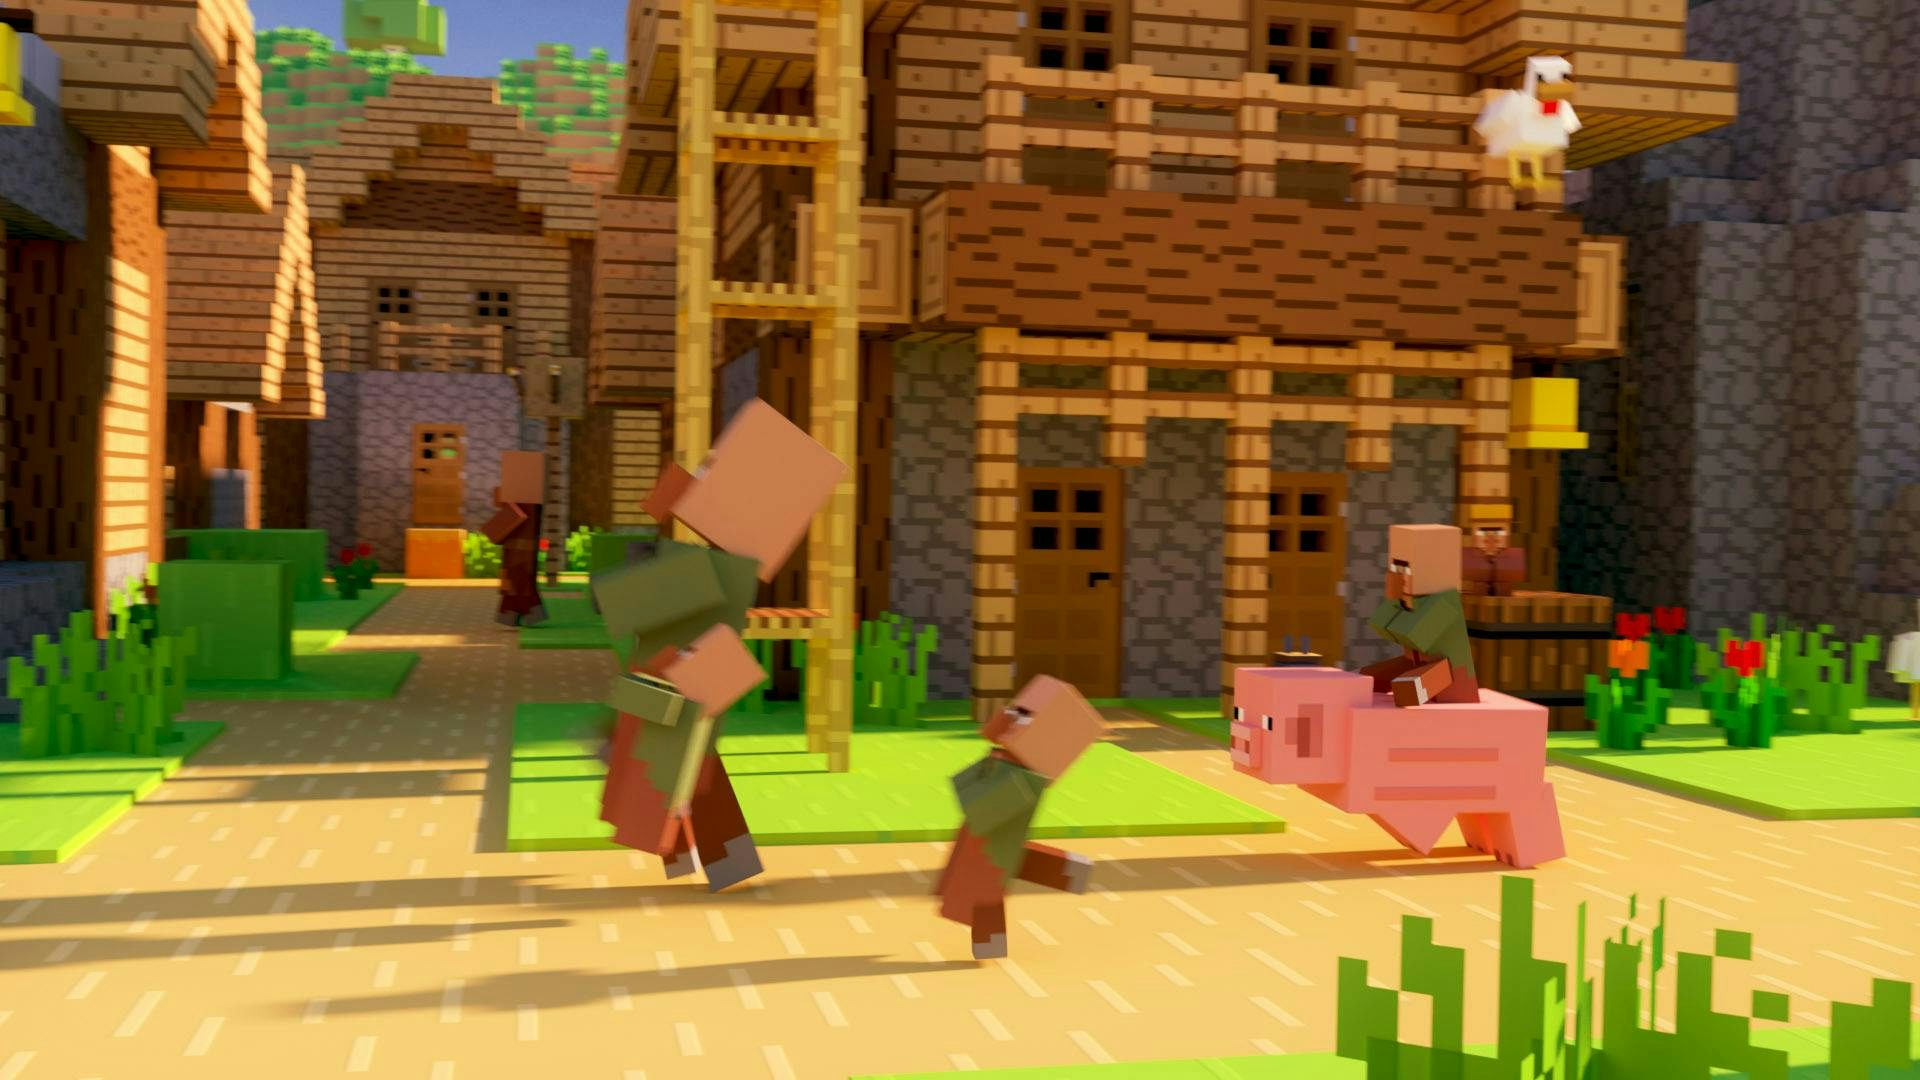 Two baby villagers and one villager being chased by a baby villagers riding a pig.